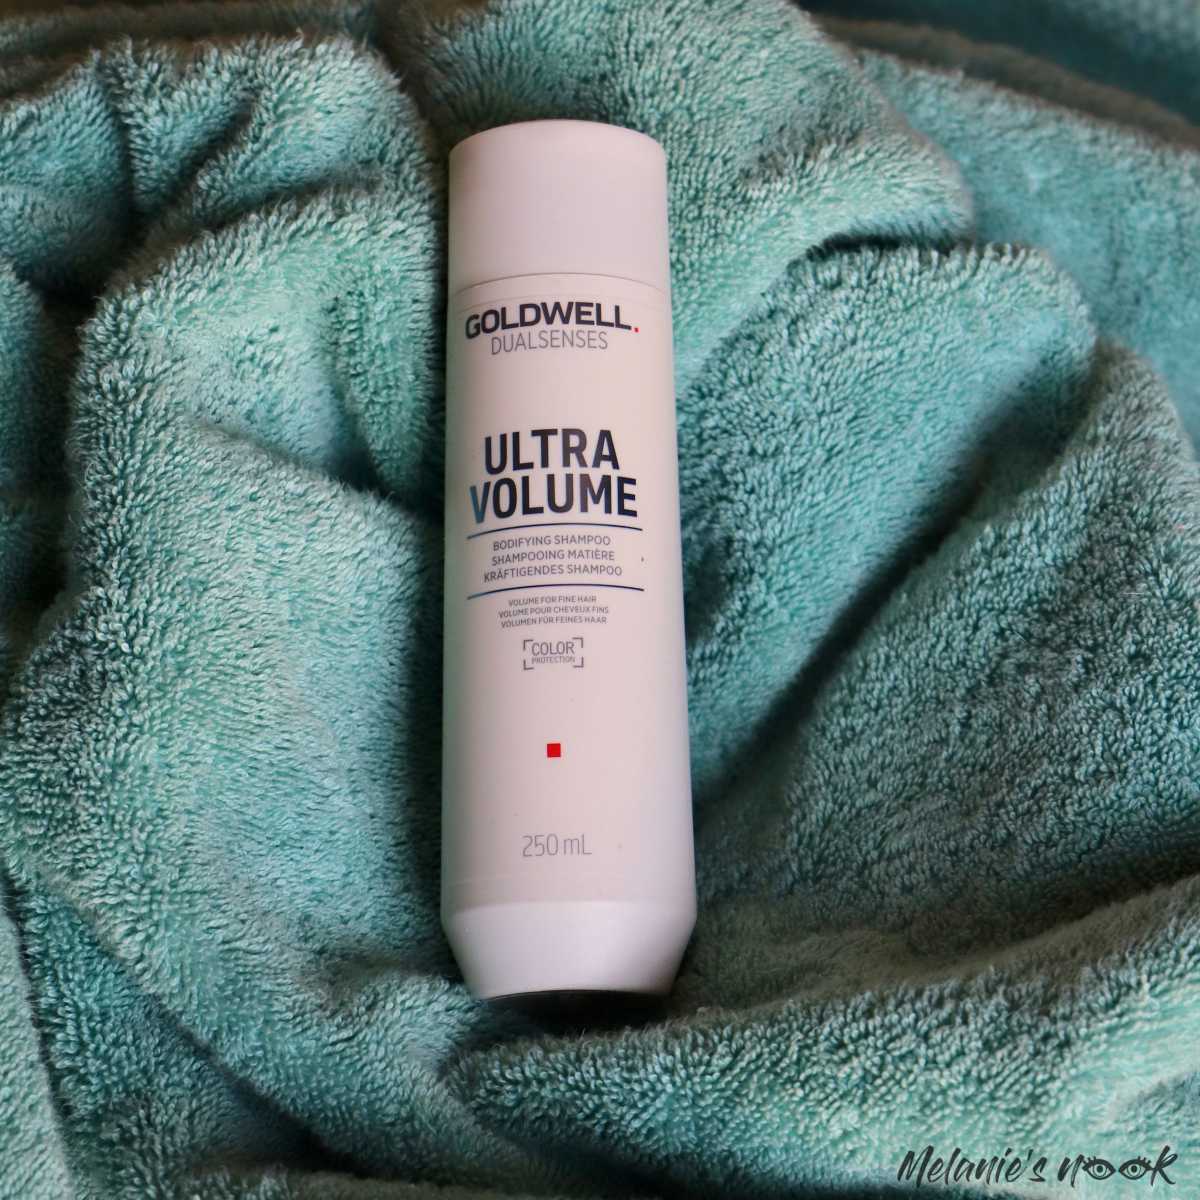 Shampoo Review - Goldwell